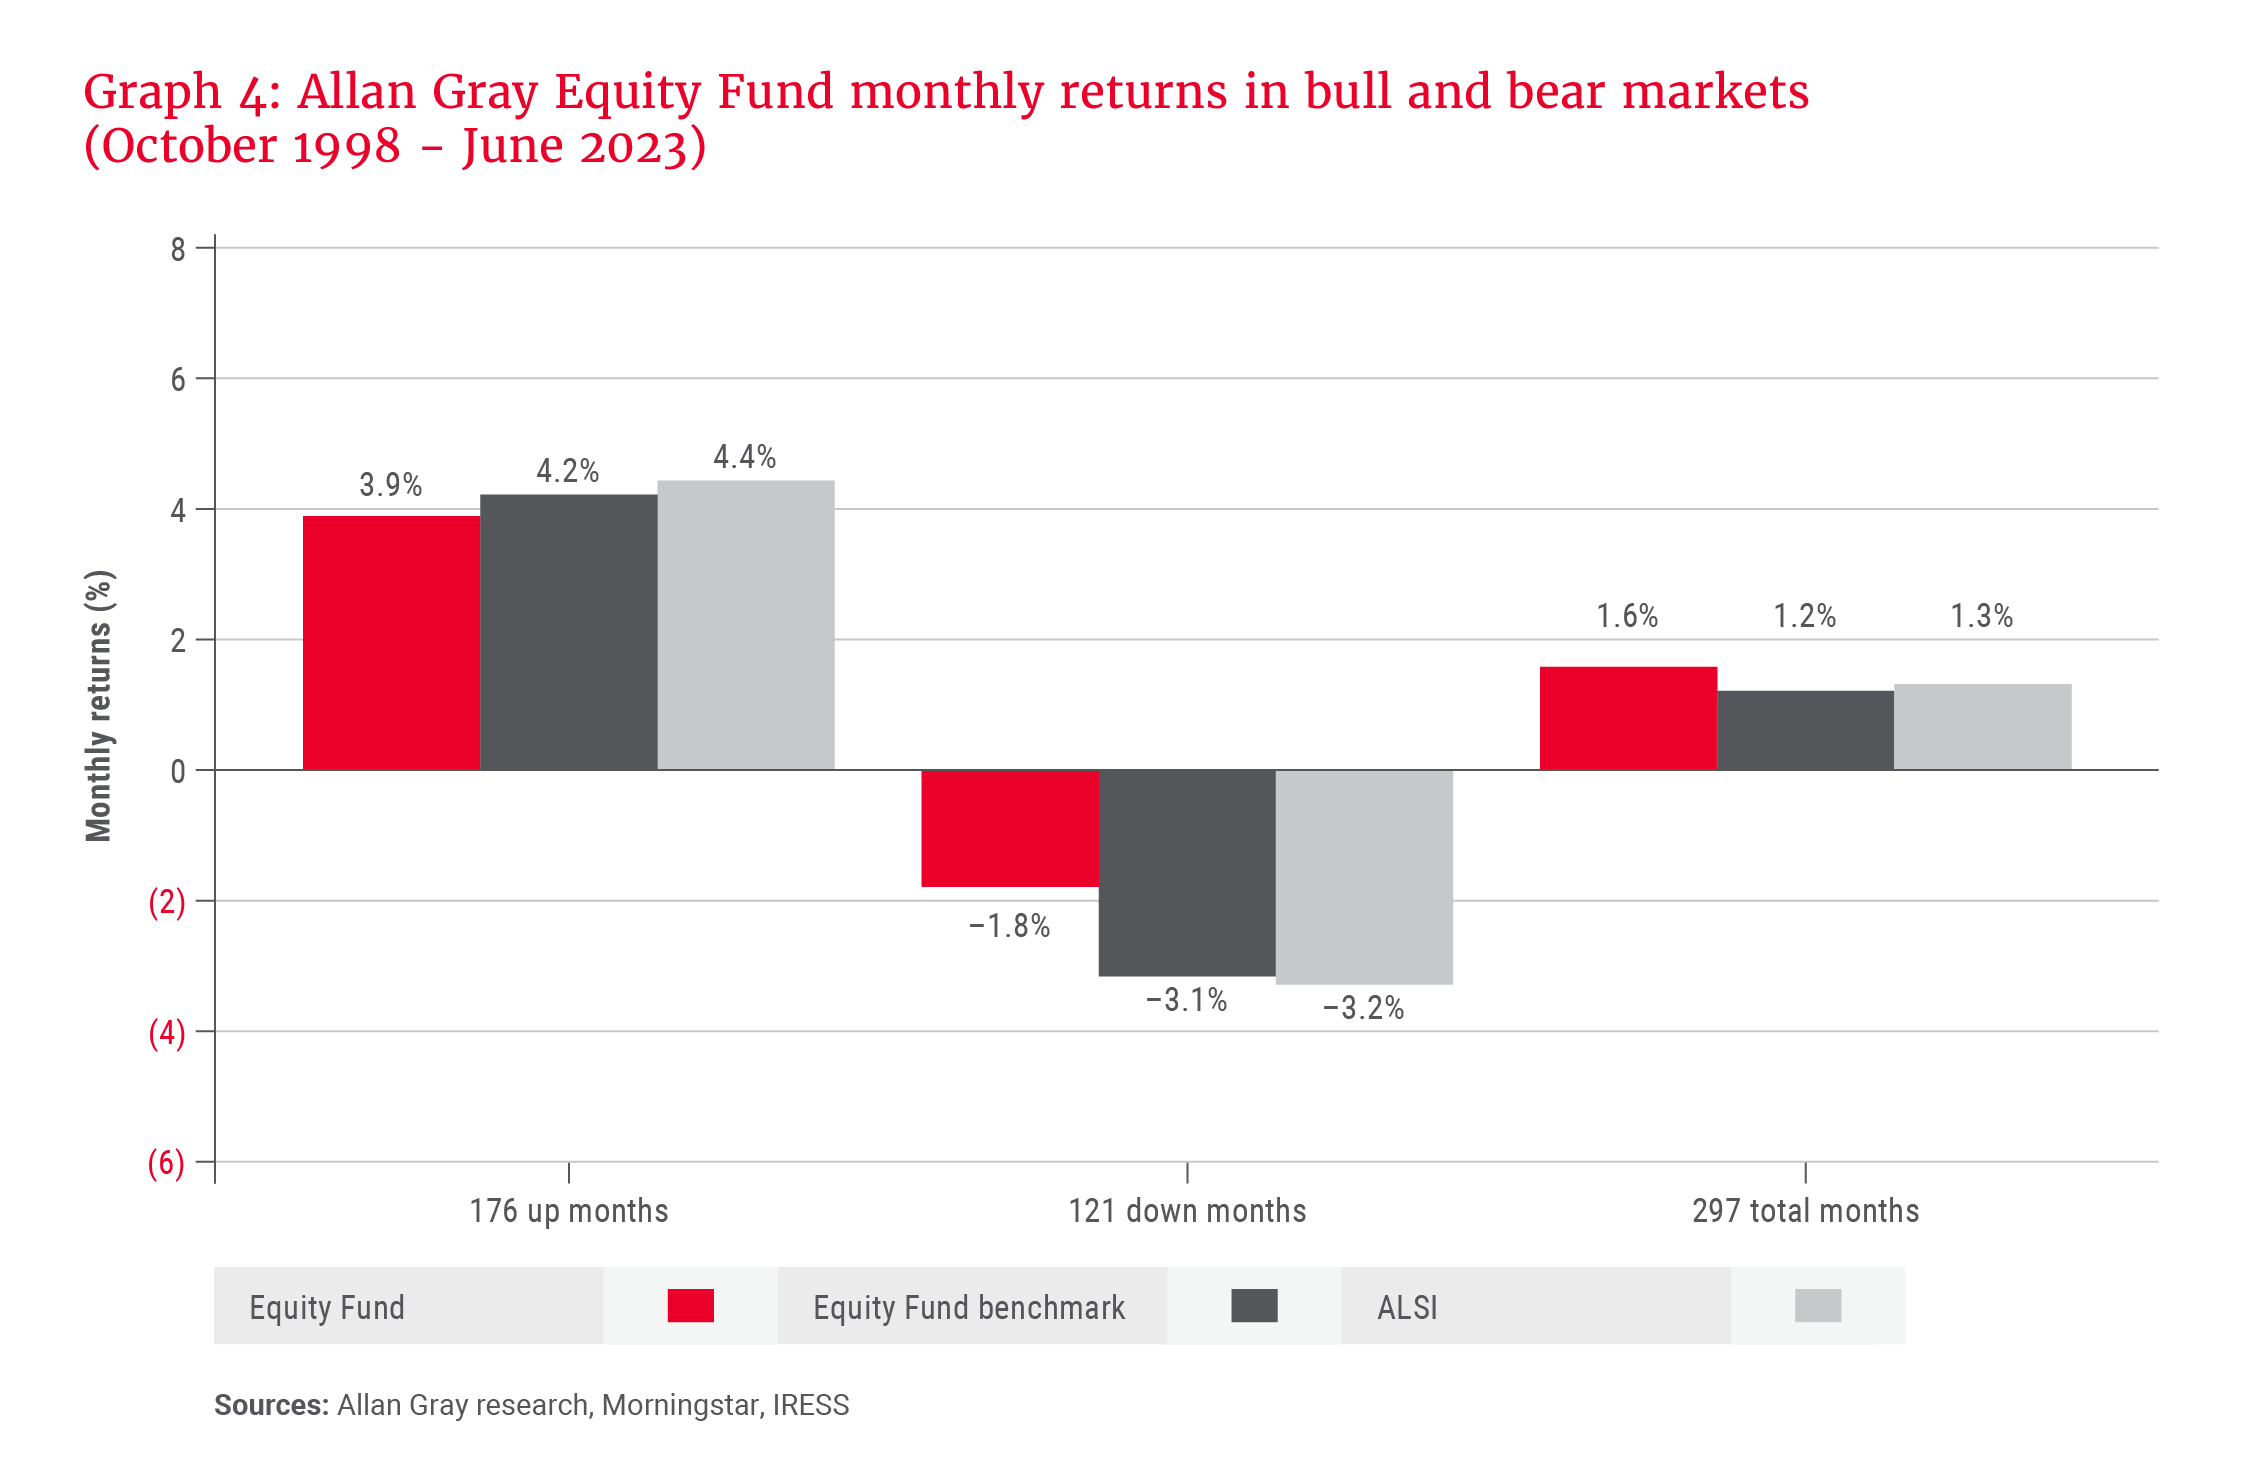 Allan Gray Equity Fund monthly returns in bull and bear markets (October 1998 - June 2023)